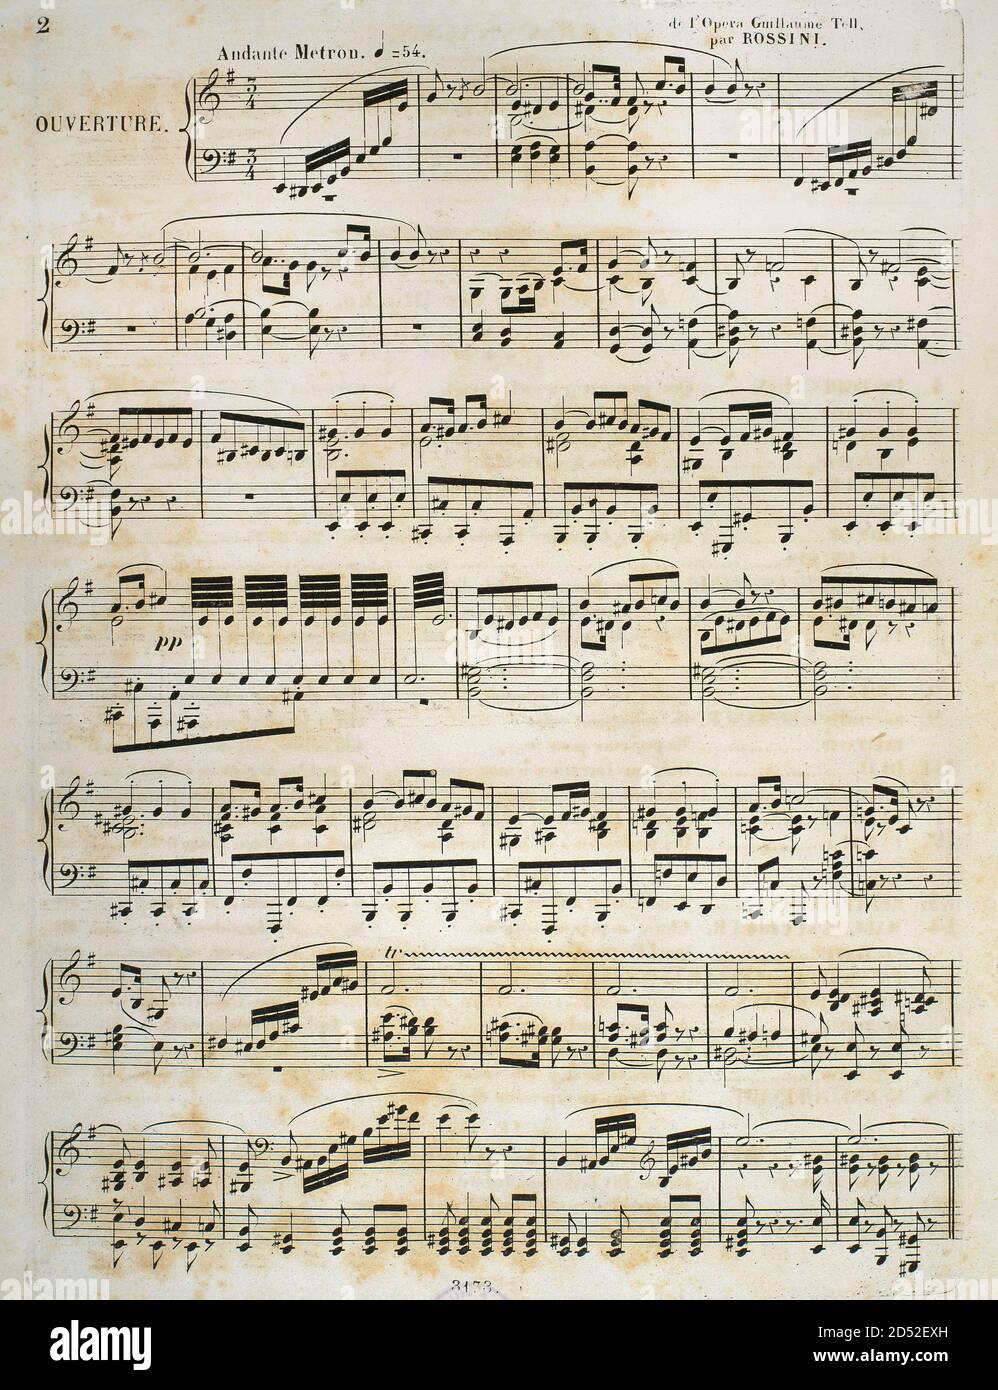 Gioacchino Rossini (1792-1868). Italian composer. Sheet music of 'William Tell'. French-language opera in four acts. It was first performed by the Paris Opera at the Salle Le Peletier on 3 August 1829. Music Library of the Court. Turin, Italy. Stock Photo